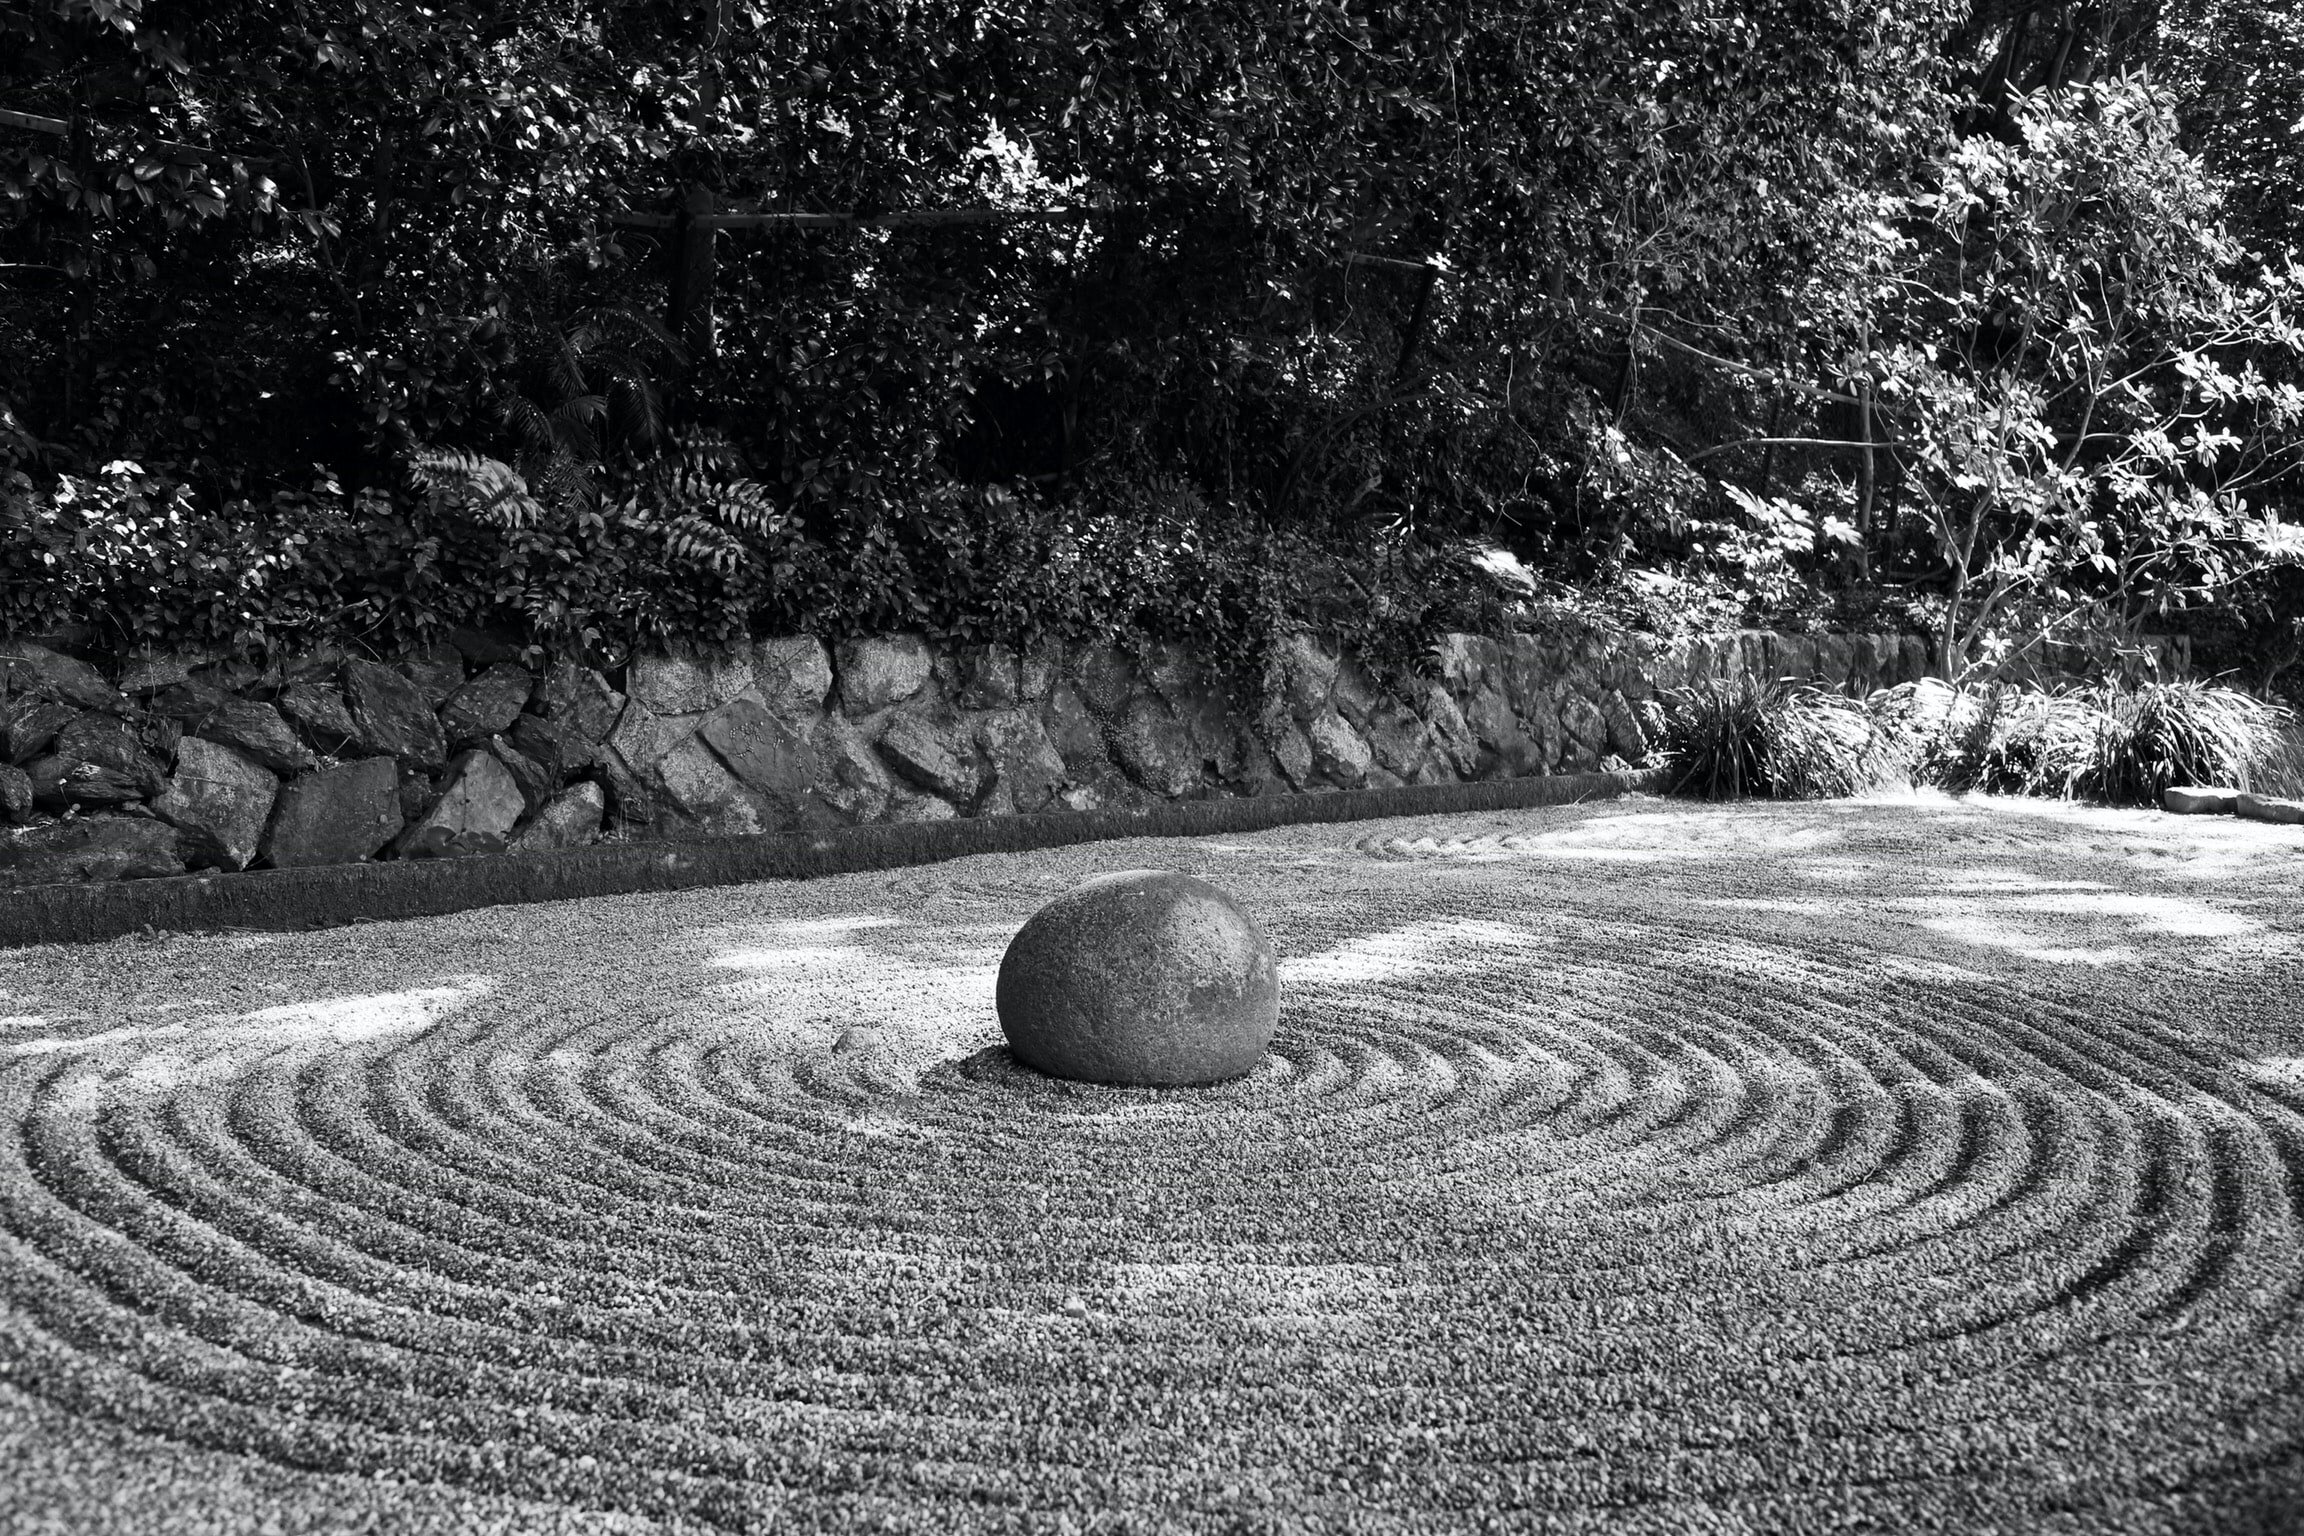 Large stone in the middle of a natural labyrinth